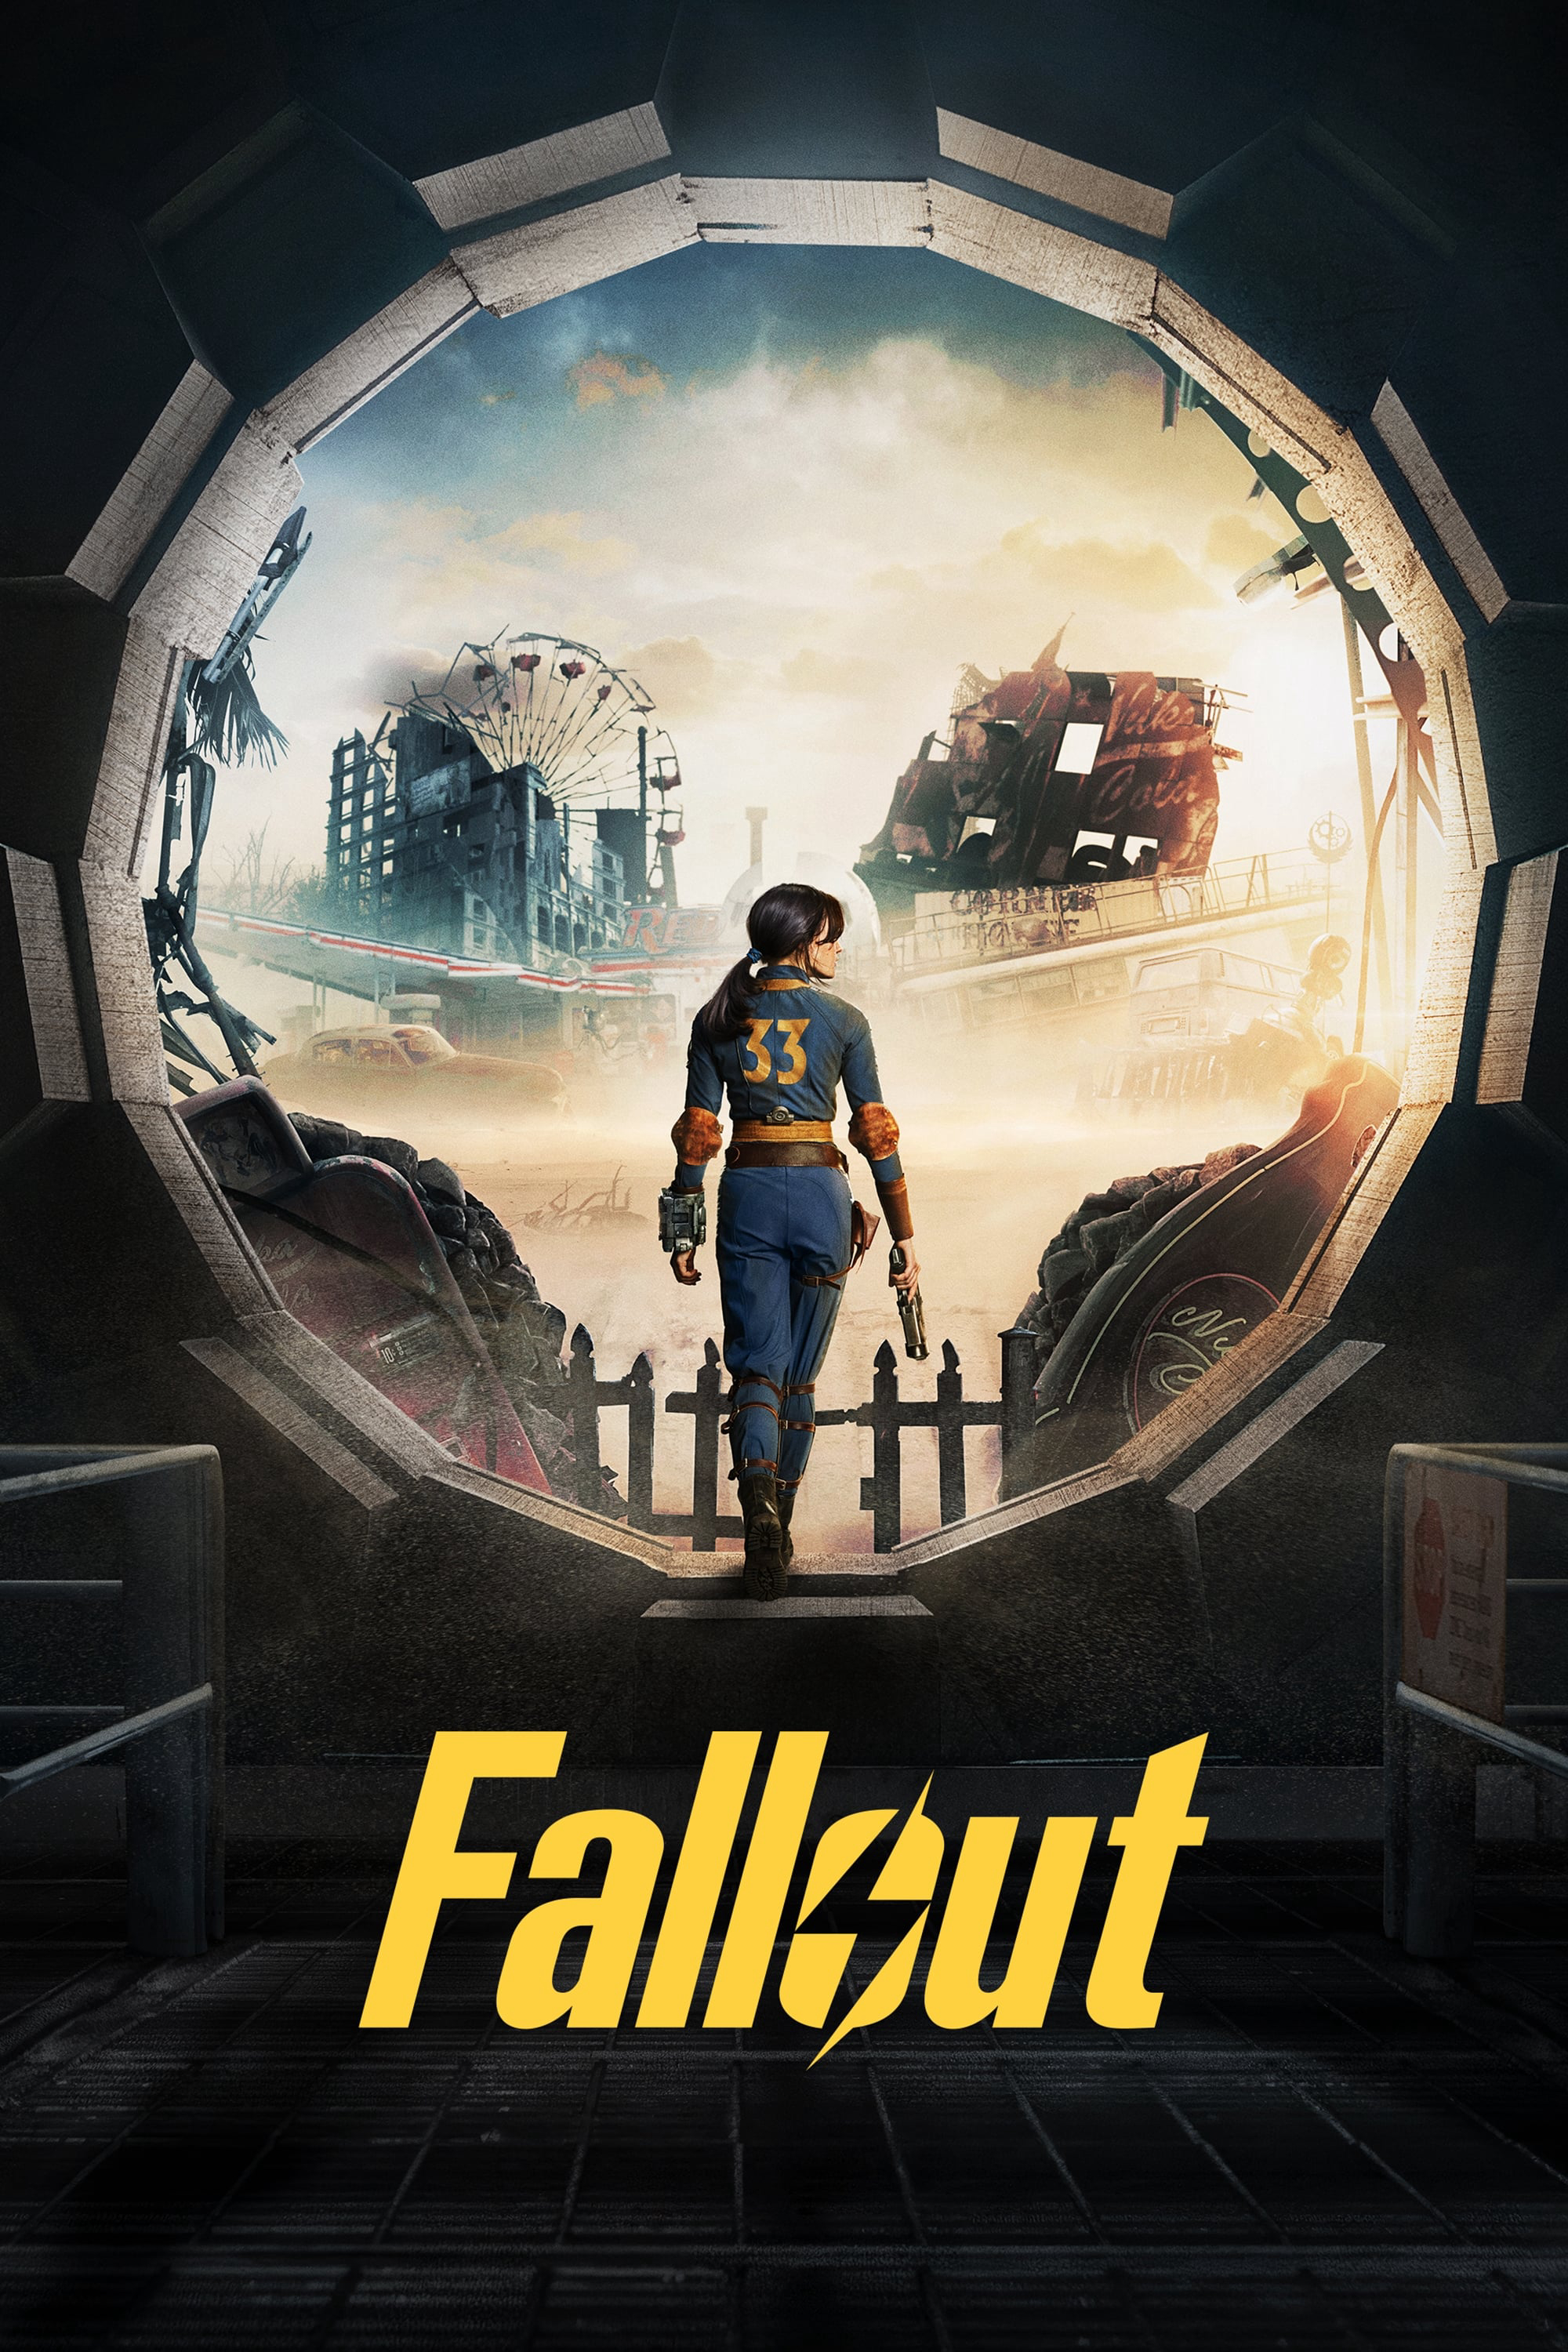 Poster Phim Fallout (Fallout)